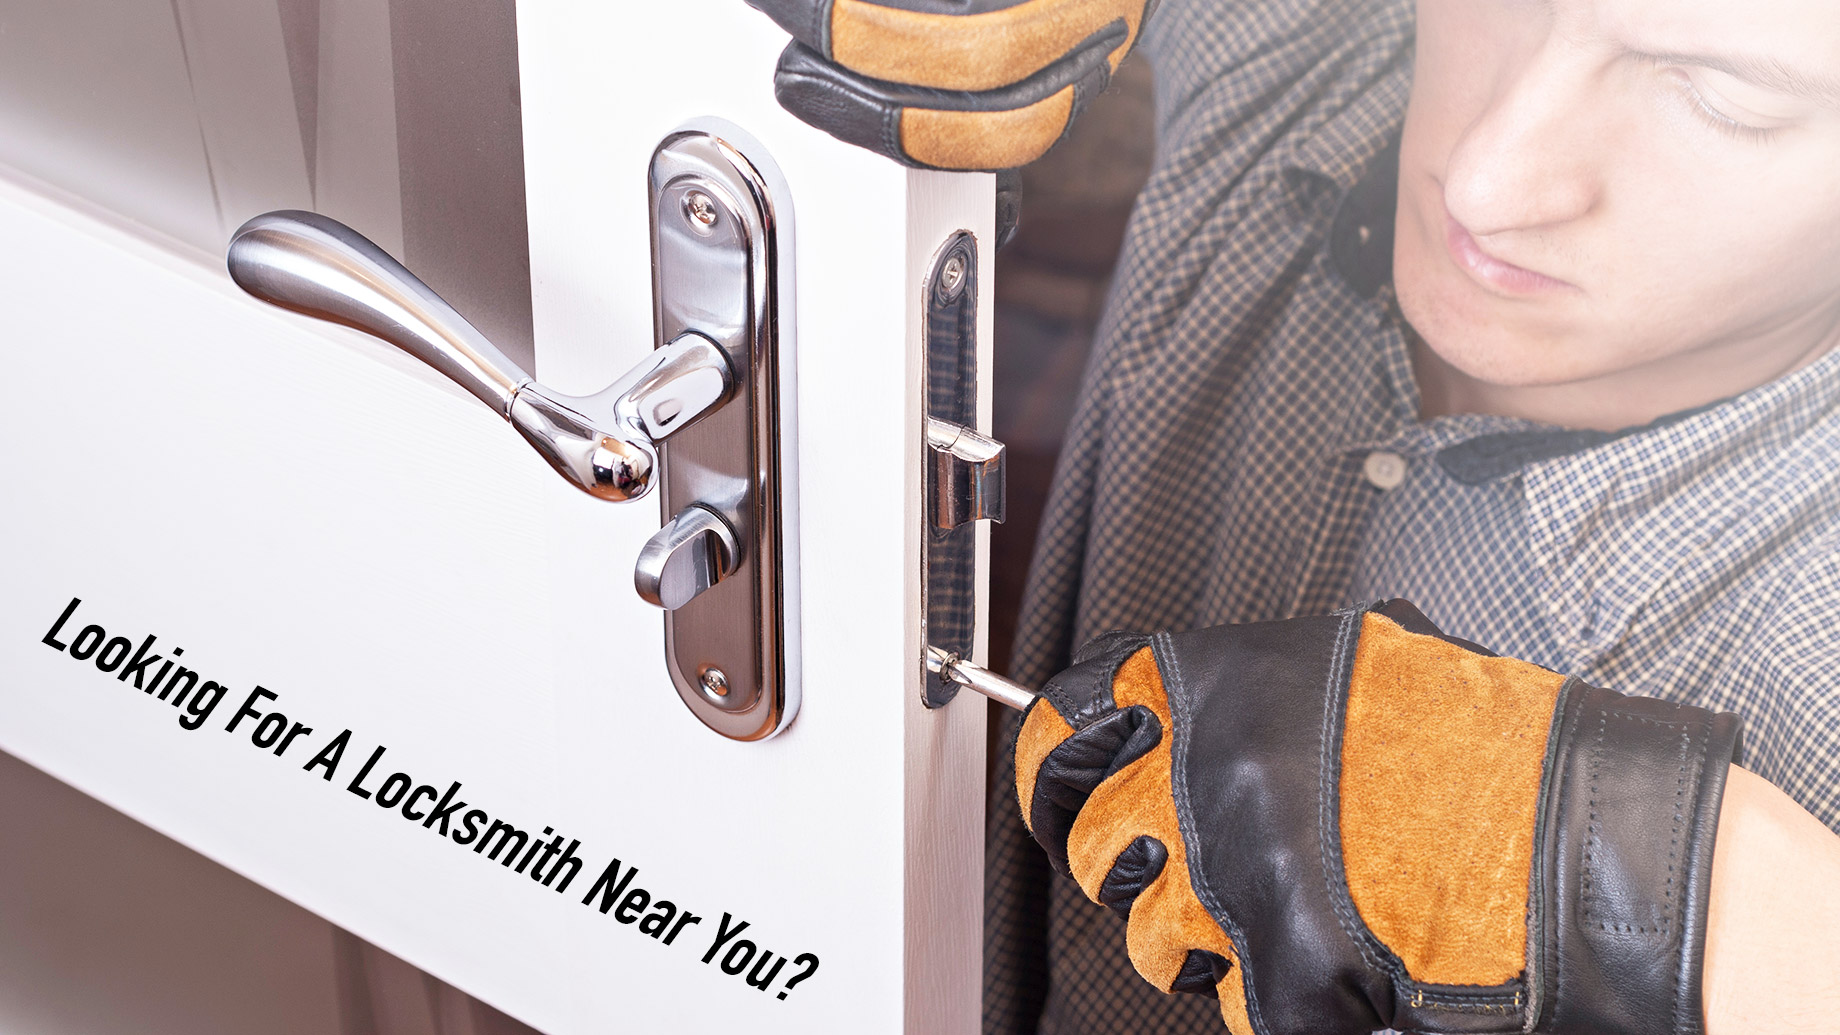 Looking For A Locksmith Near You?